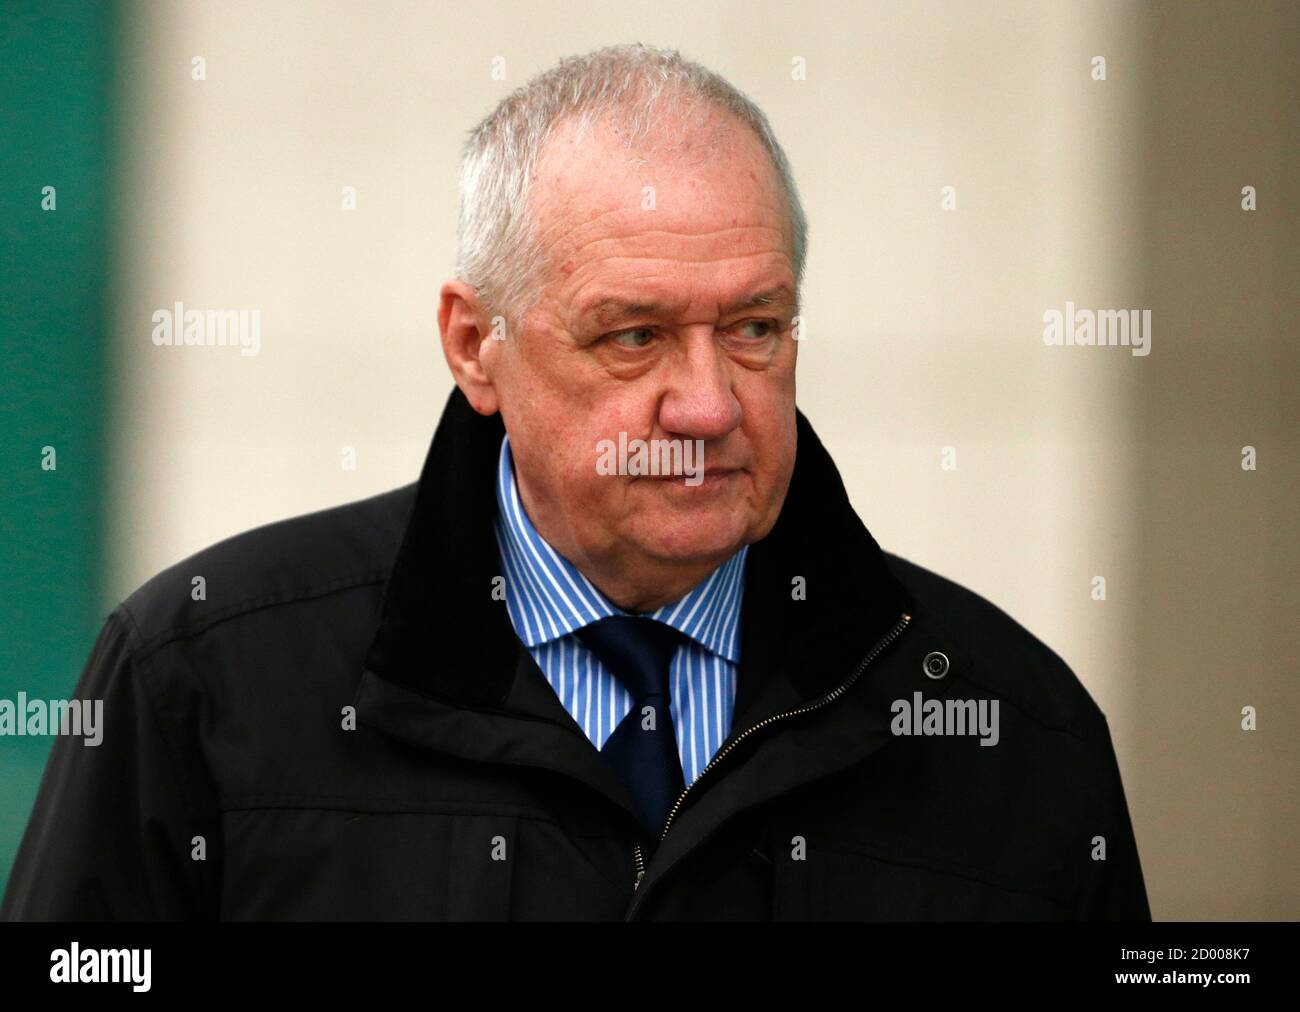 Former Chief Superintendent of South Yorkshire Police, David Duckenfield, leaves after giving evidence to the Hillsborough Inquest in Warrington, northern England March 12, 2015. Duckenfield was match commander at the 1989 Hillsborough disaster, that claimed the lives of 96 men, women and children. REUTERS/Phil Noble (BRITAIN  - Tags: CRIME LAW SPORT SOCCER) Stock Photo